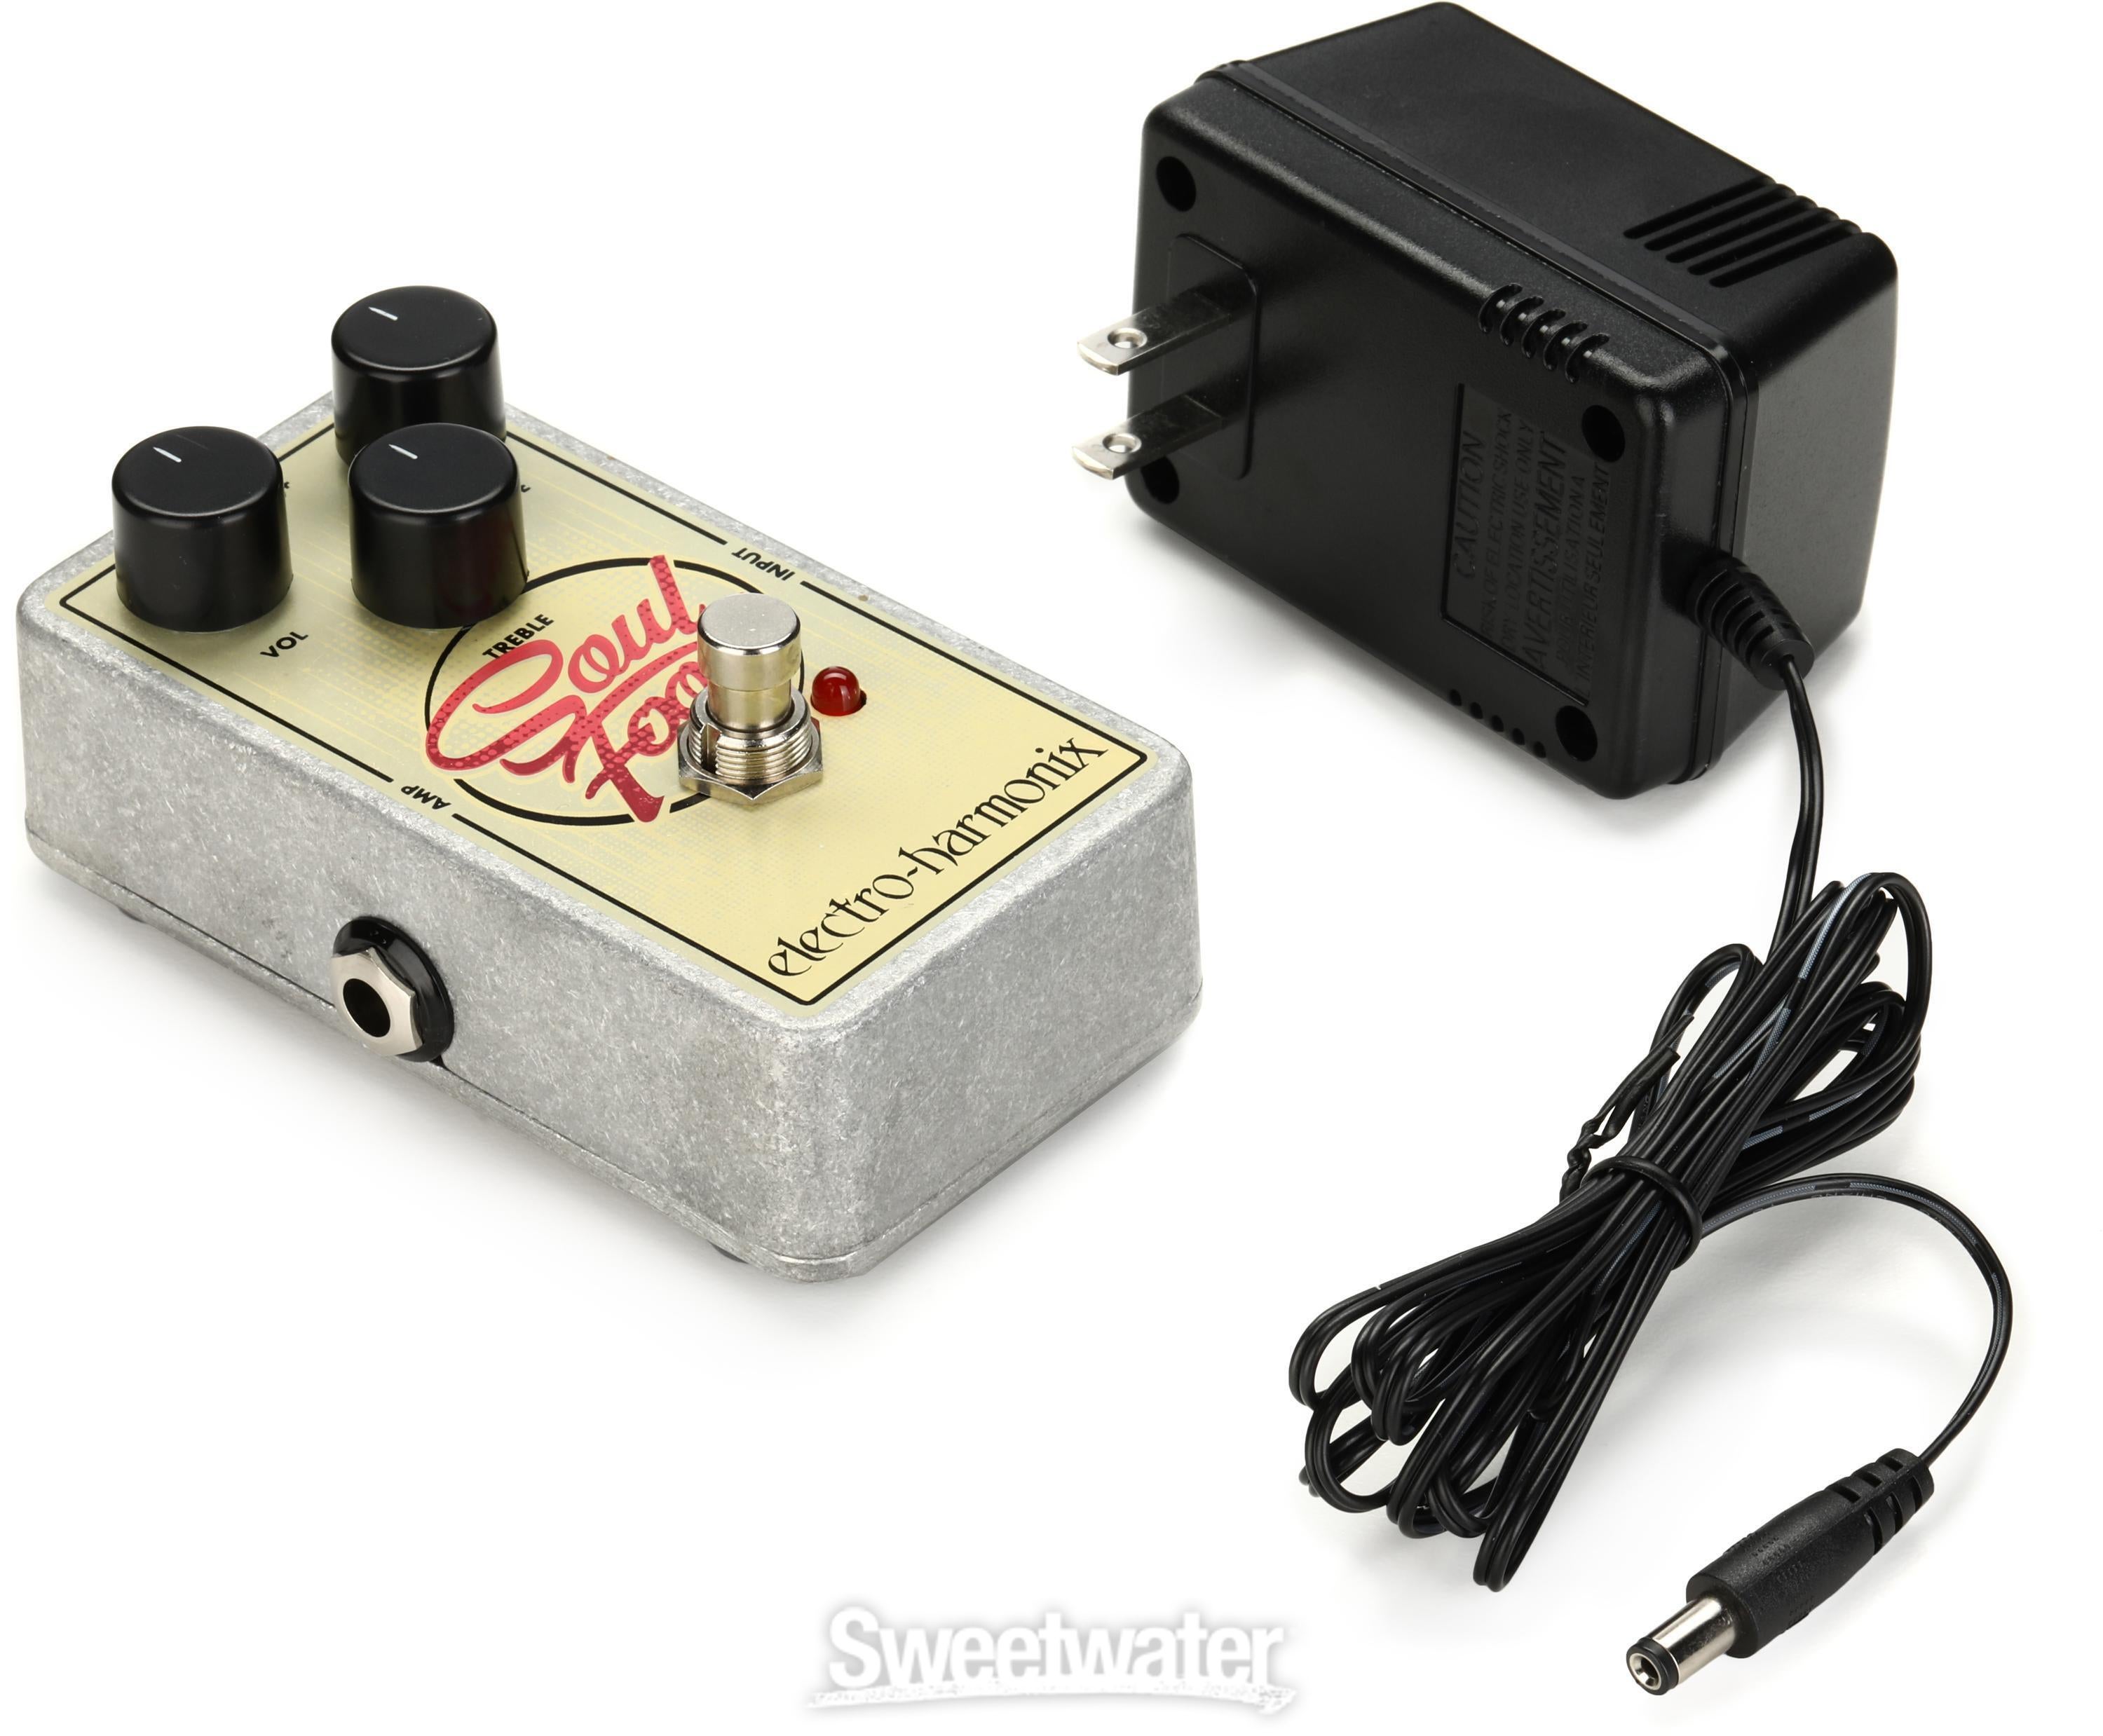 Pedal　Soul　Electro-Harmonix　Distortion/Overdrive　Food　Sweetwater